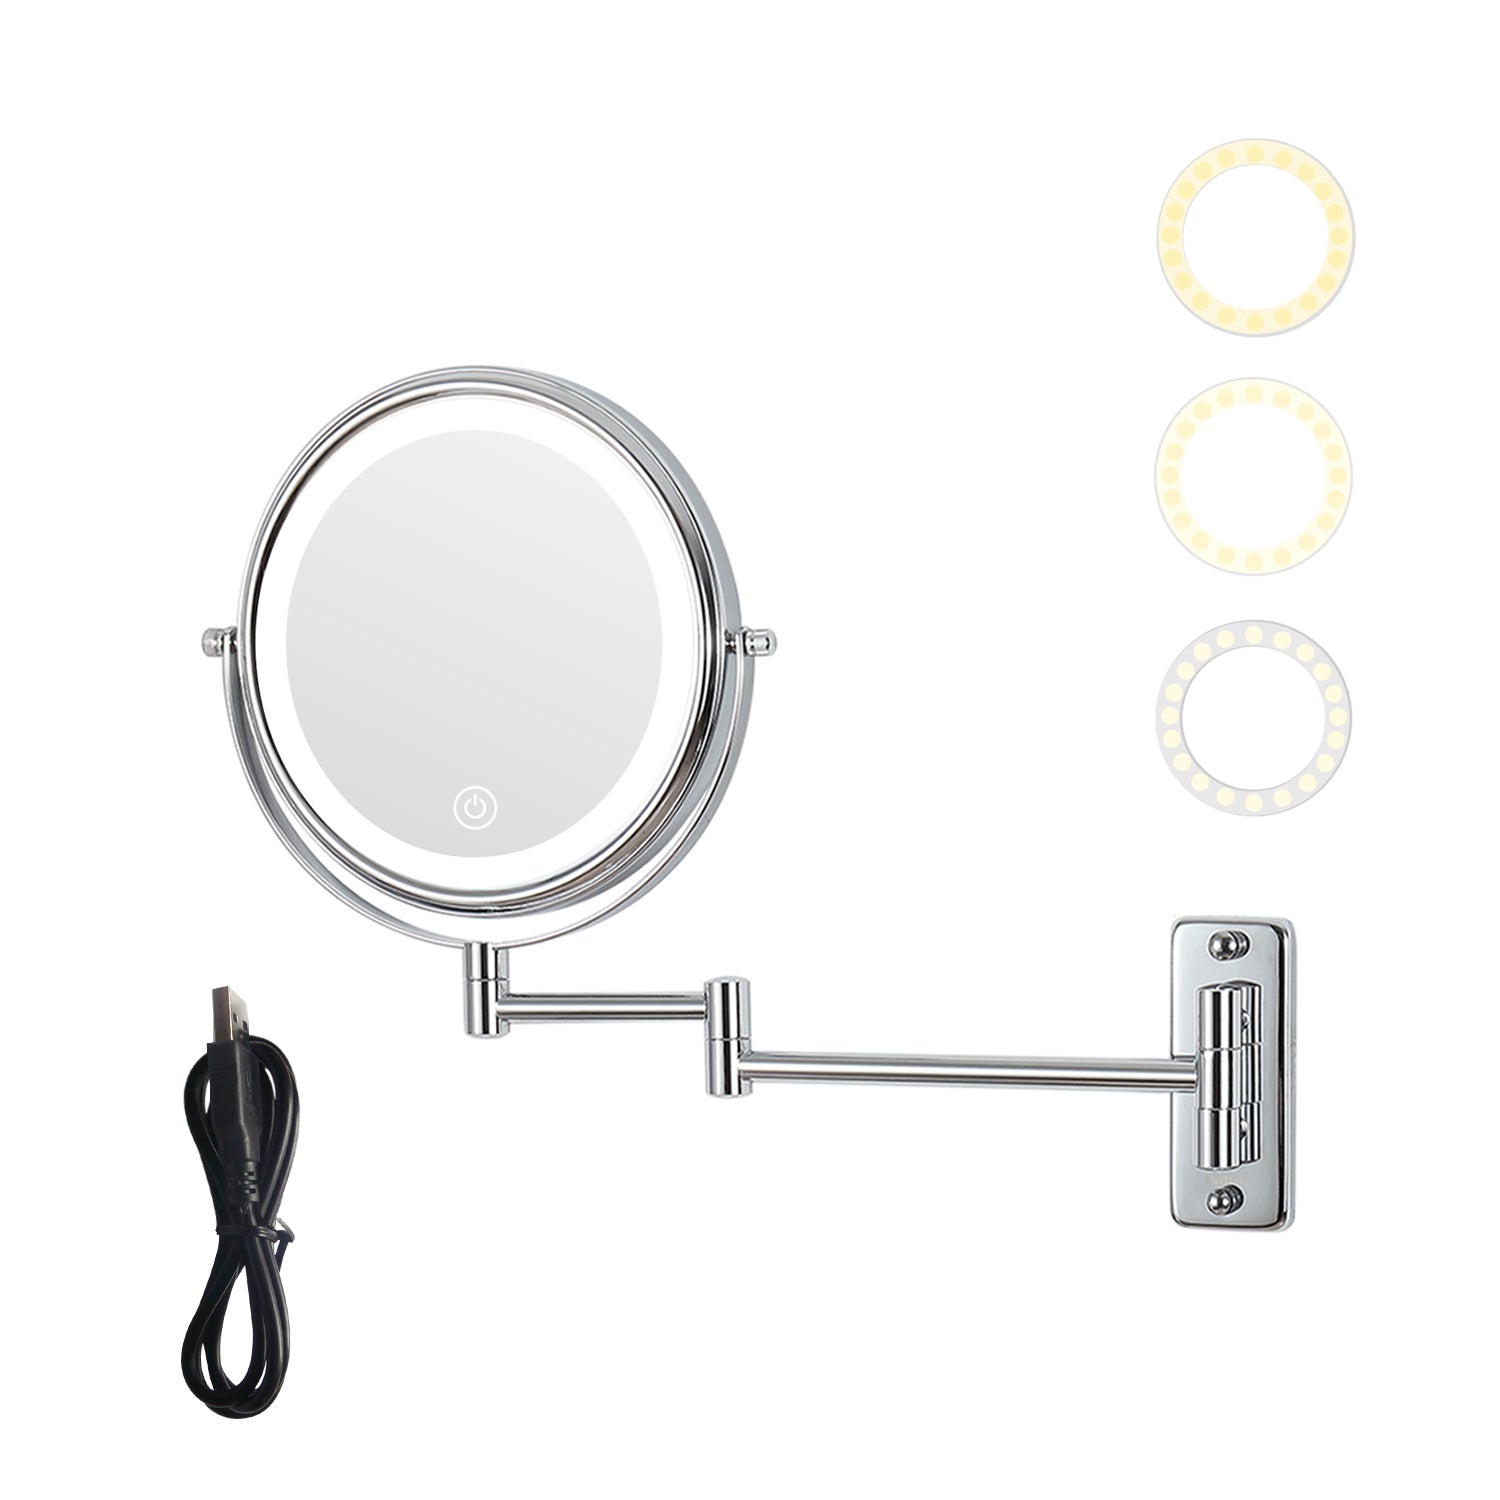 8-inch Wall Mounted Makeup Vanity Mirror, 3 colors Led lights, 1X/10X Magnification Mirror, 360° Swivel with Extension Arm (Chrome Finish) - Tonkn